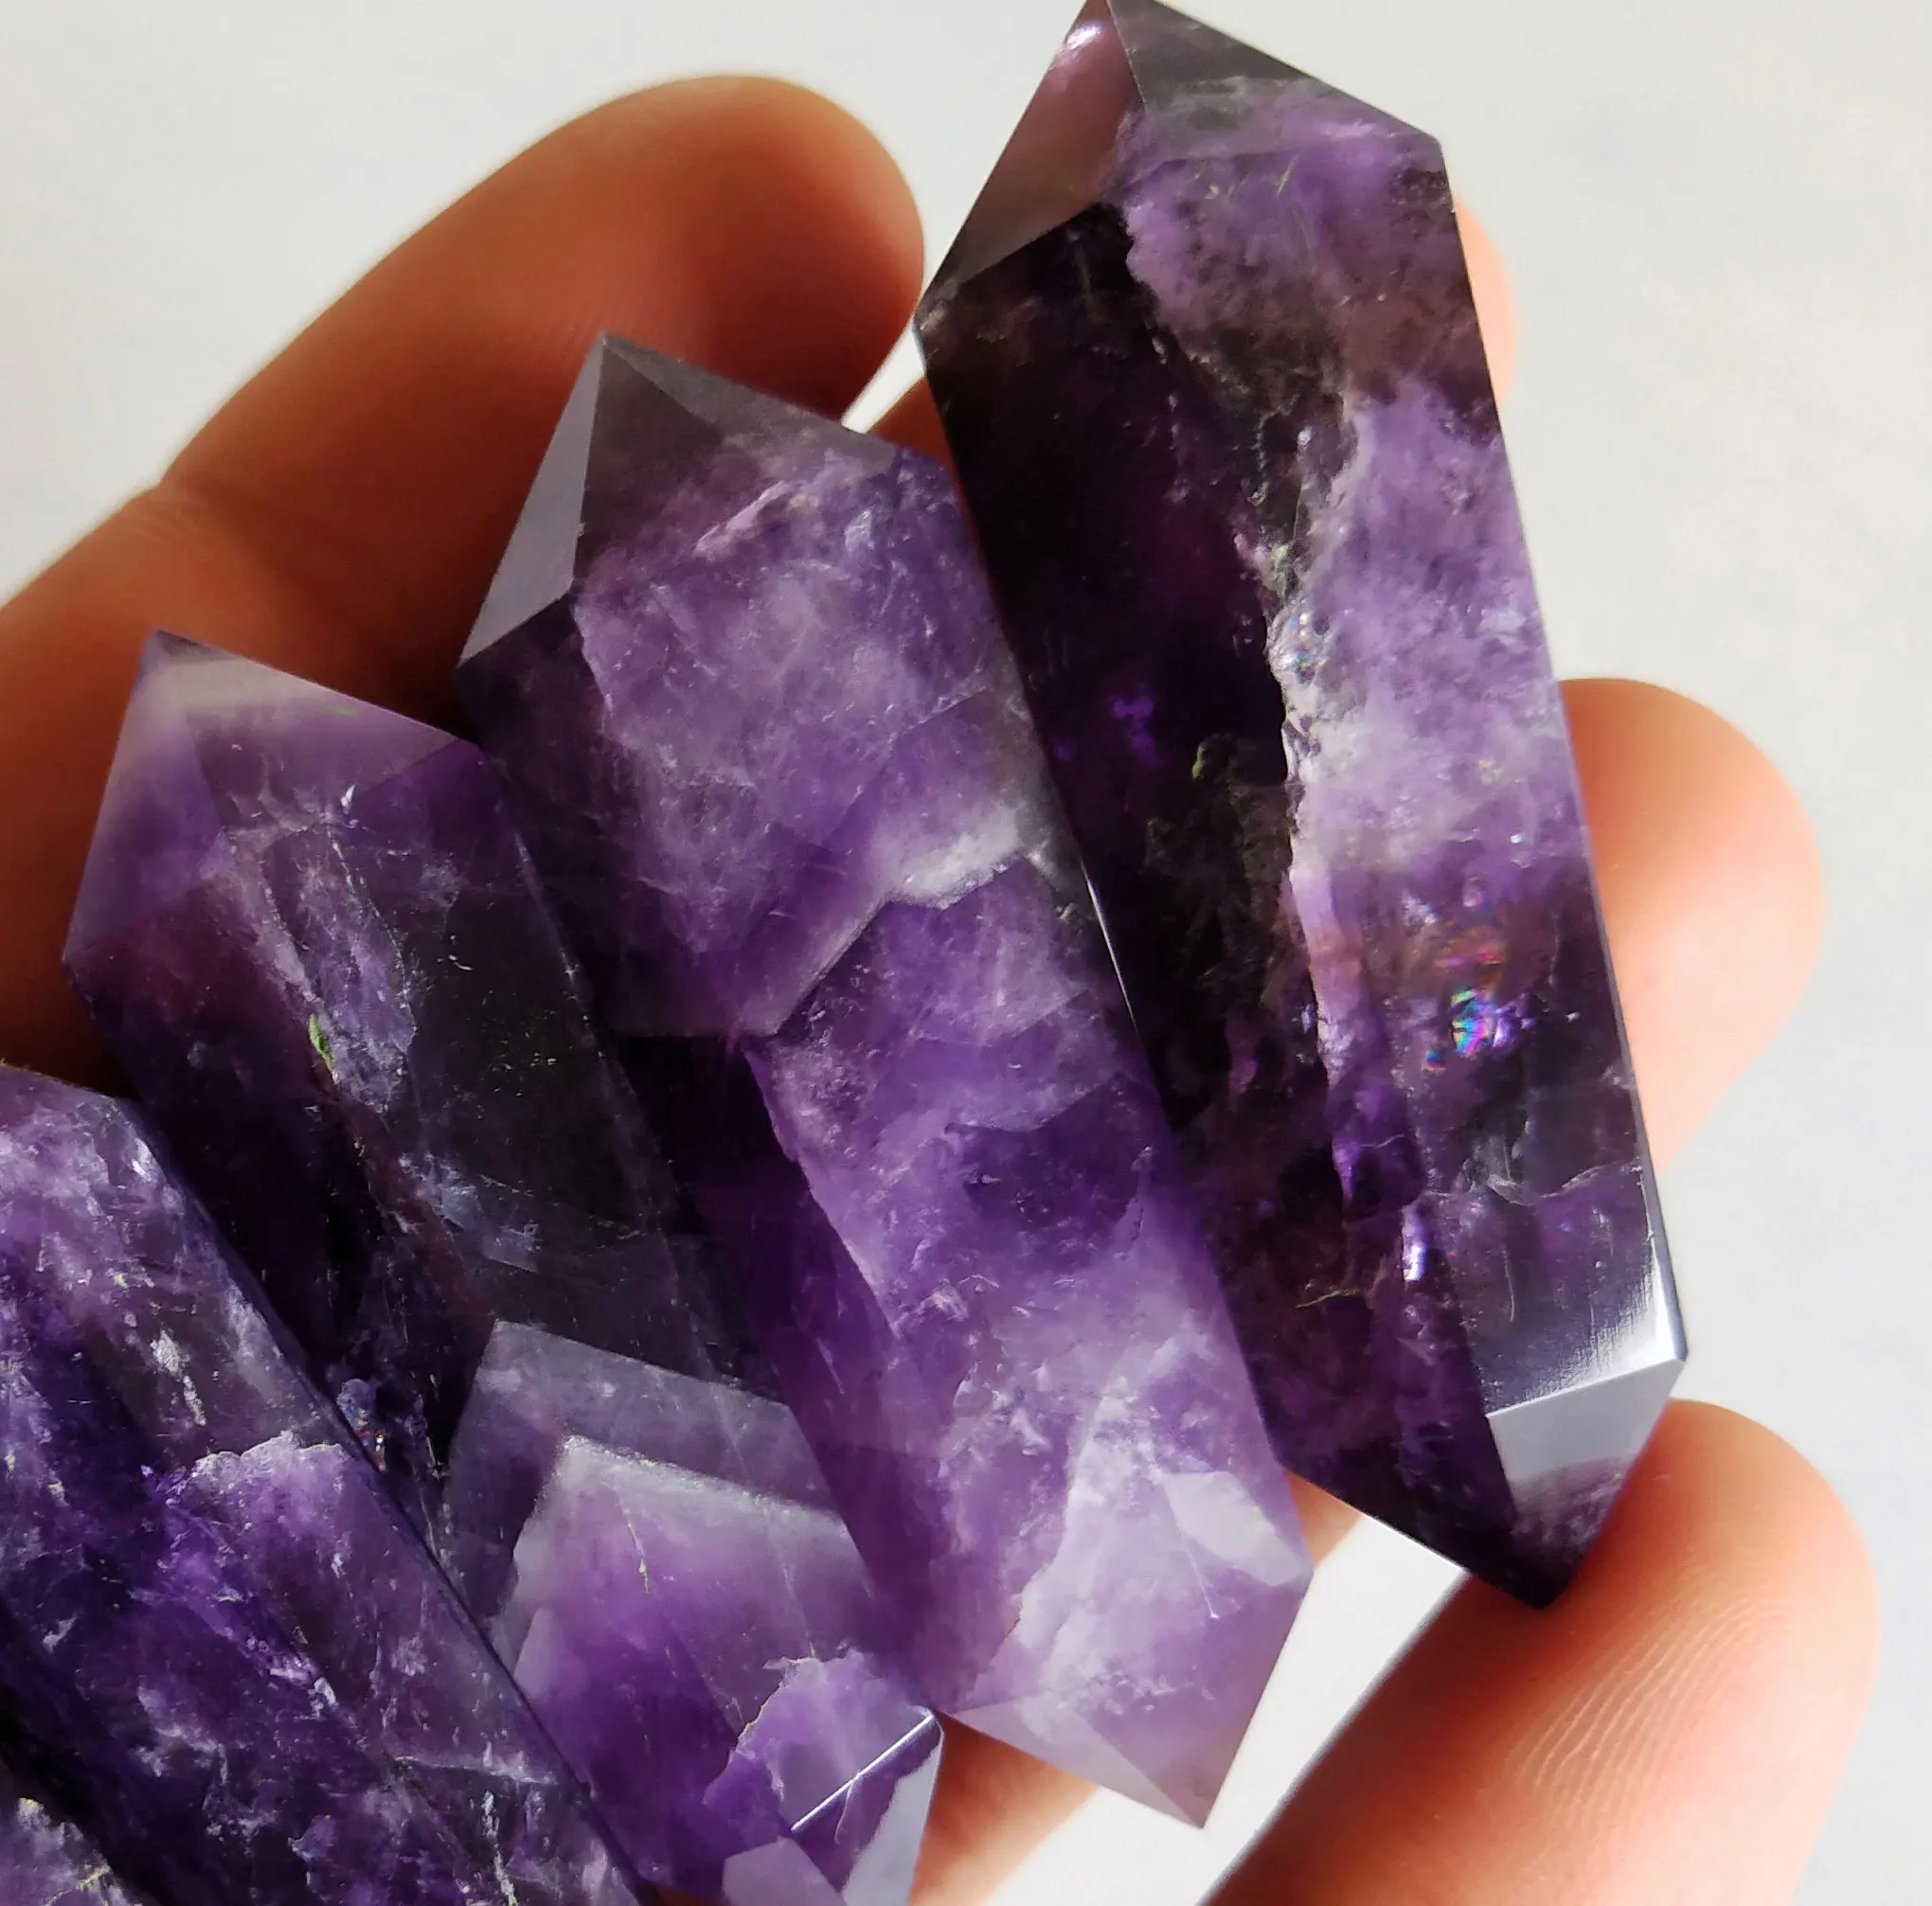 Details about   Natural Dream Amethyst Quartz heart Crystal Double Point Healing 1pc